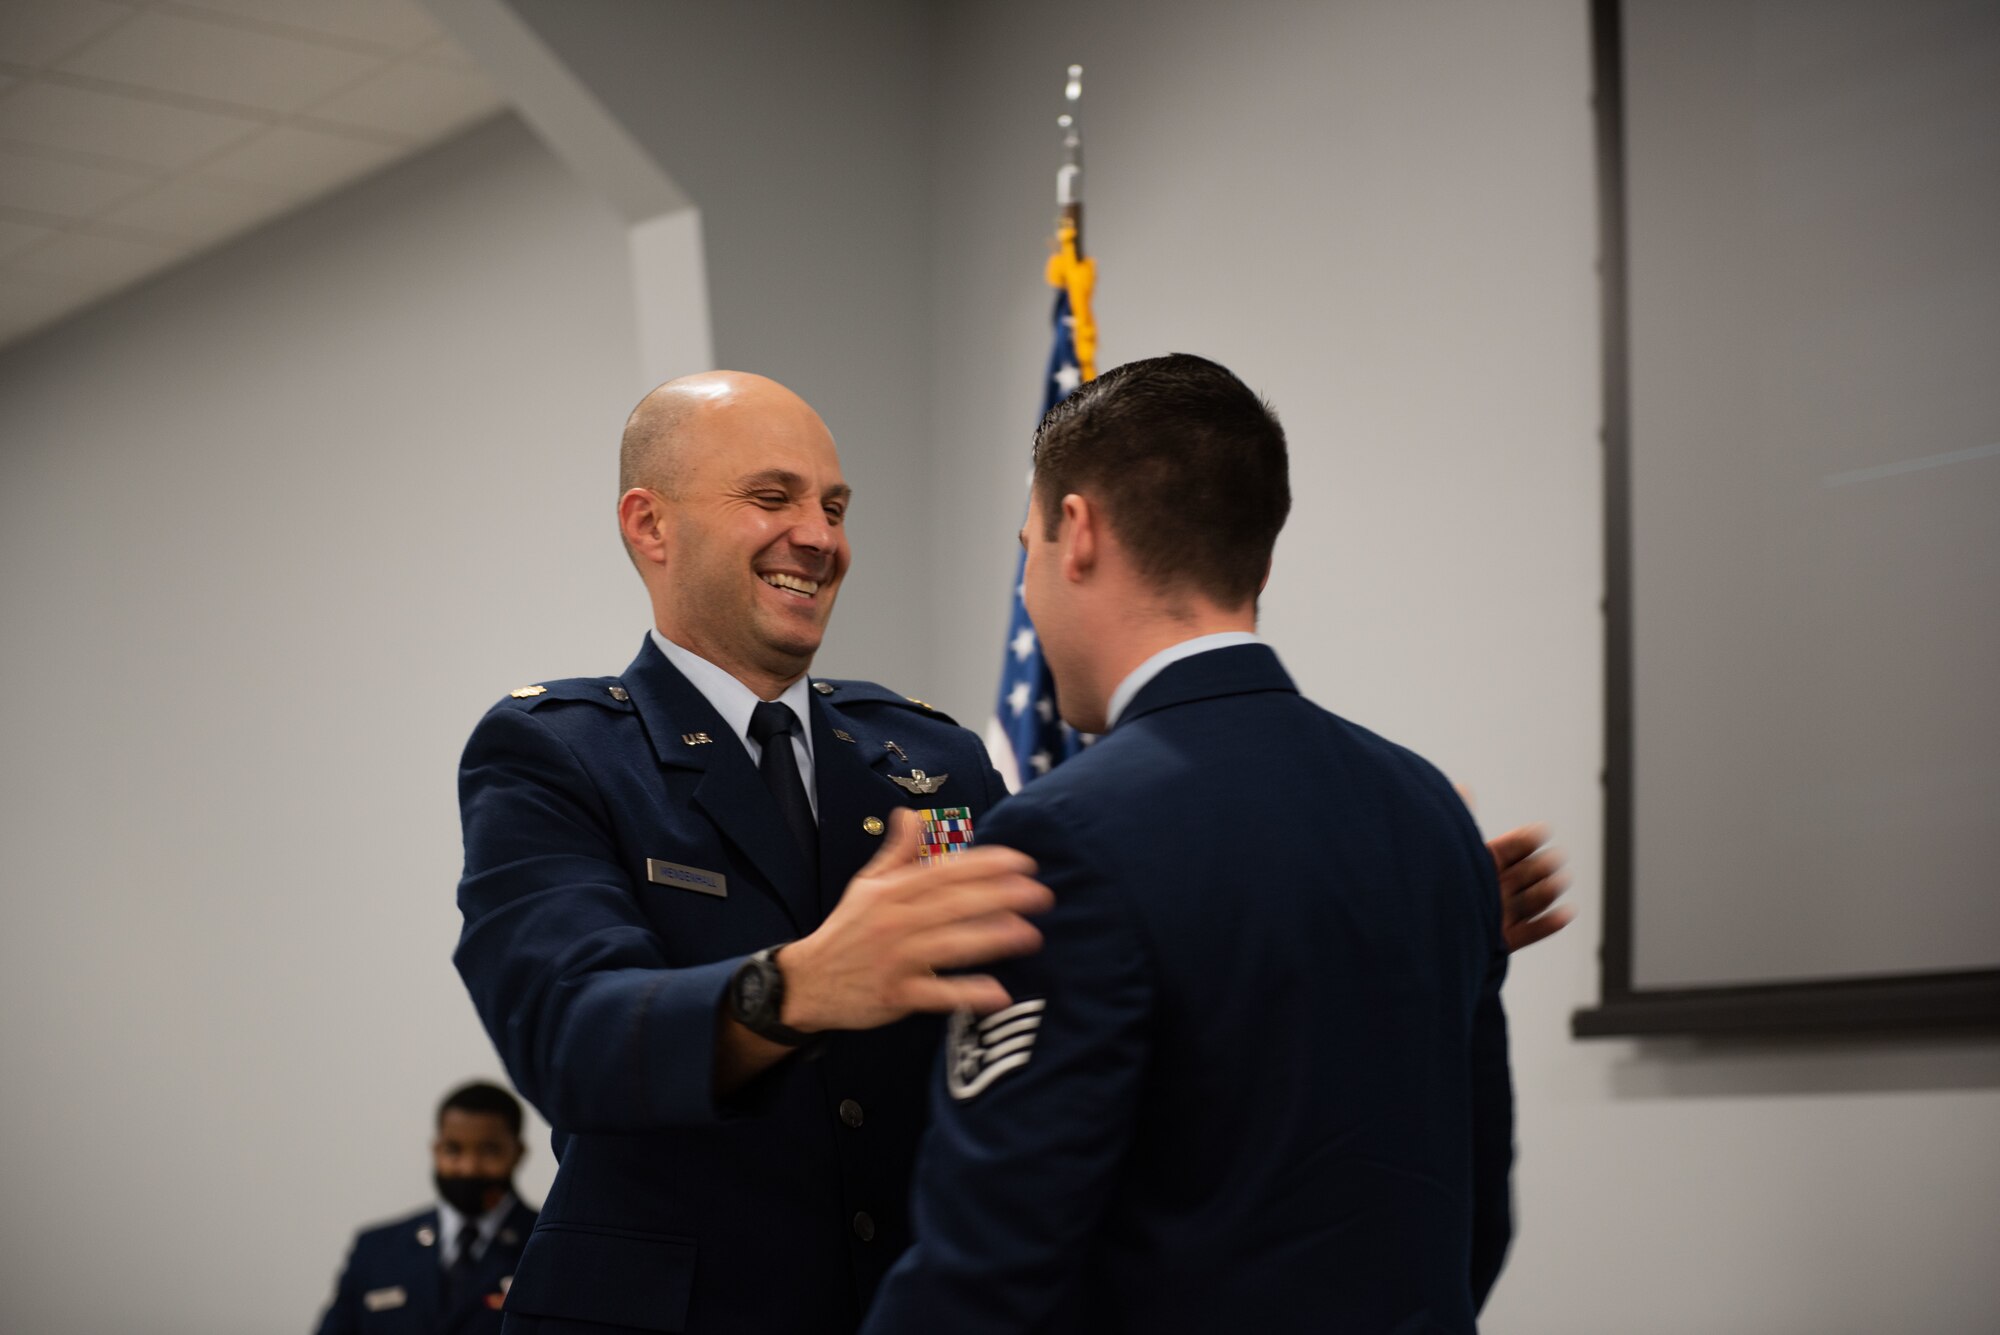 Maj. Matthew Mendenhall congratulates his son, Staff Sgt. Ethan Mendenhall after his re-enlistment in the U.S. Air Force.